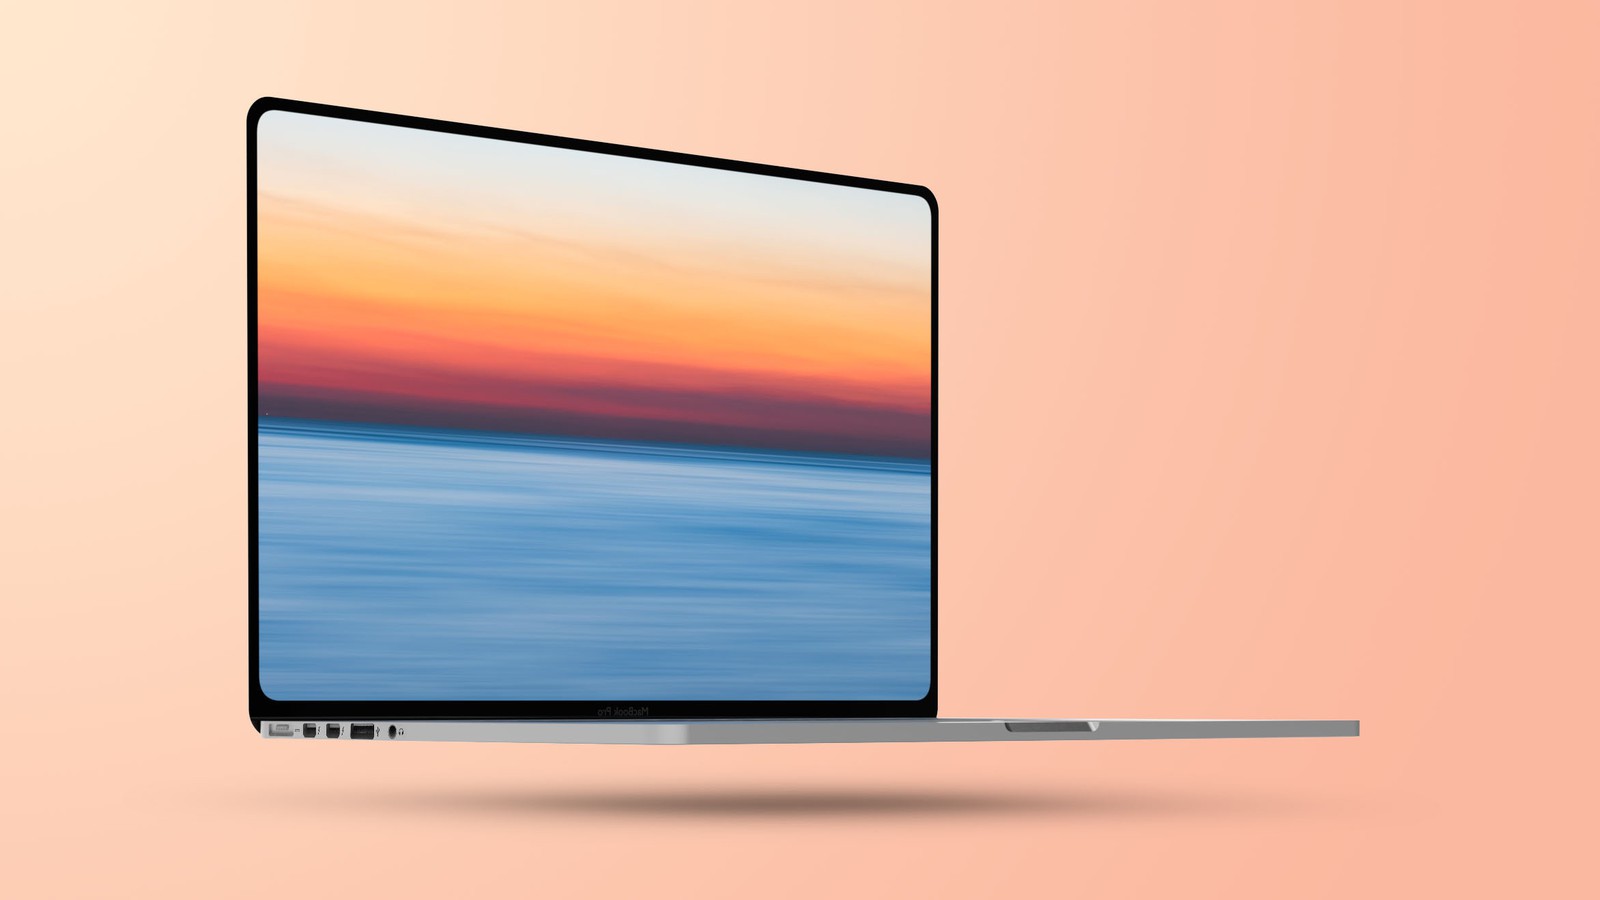 The refresh Apple MacBook Pro 2021 will have a flat design, accompanied by the iPhone 12 series